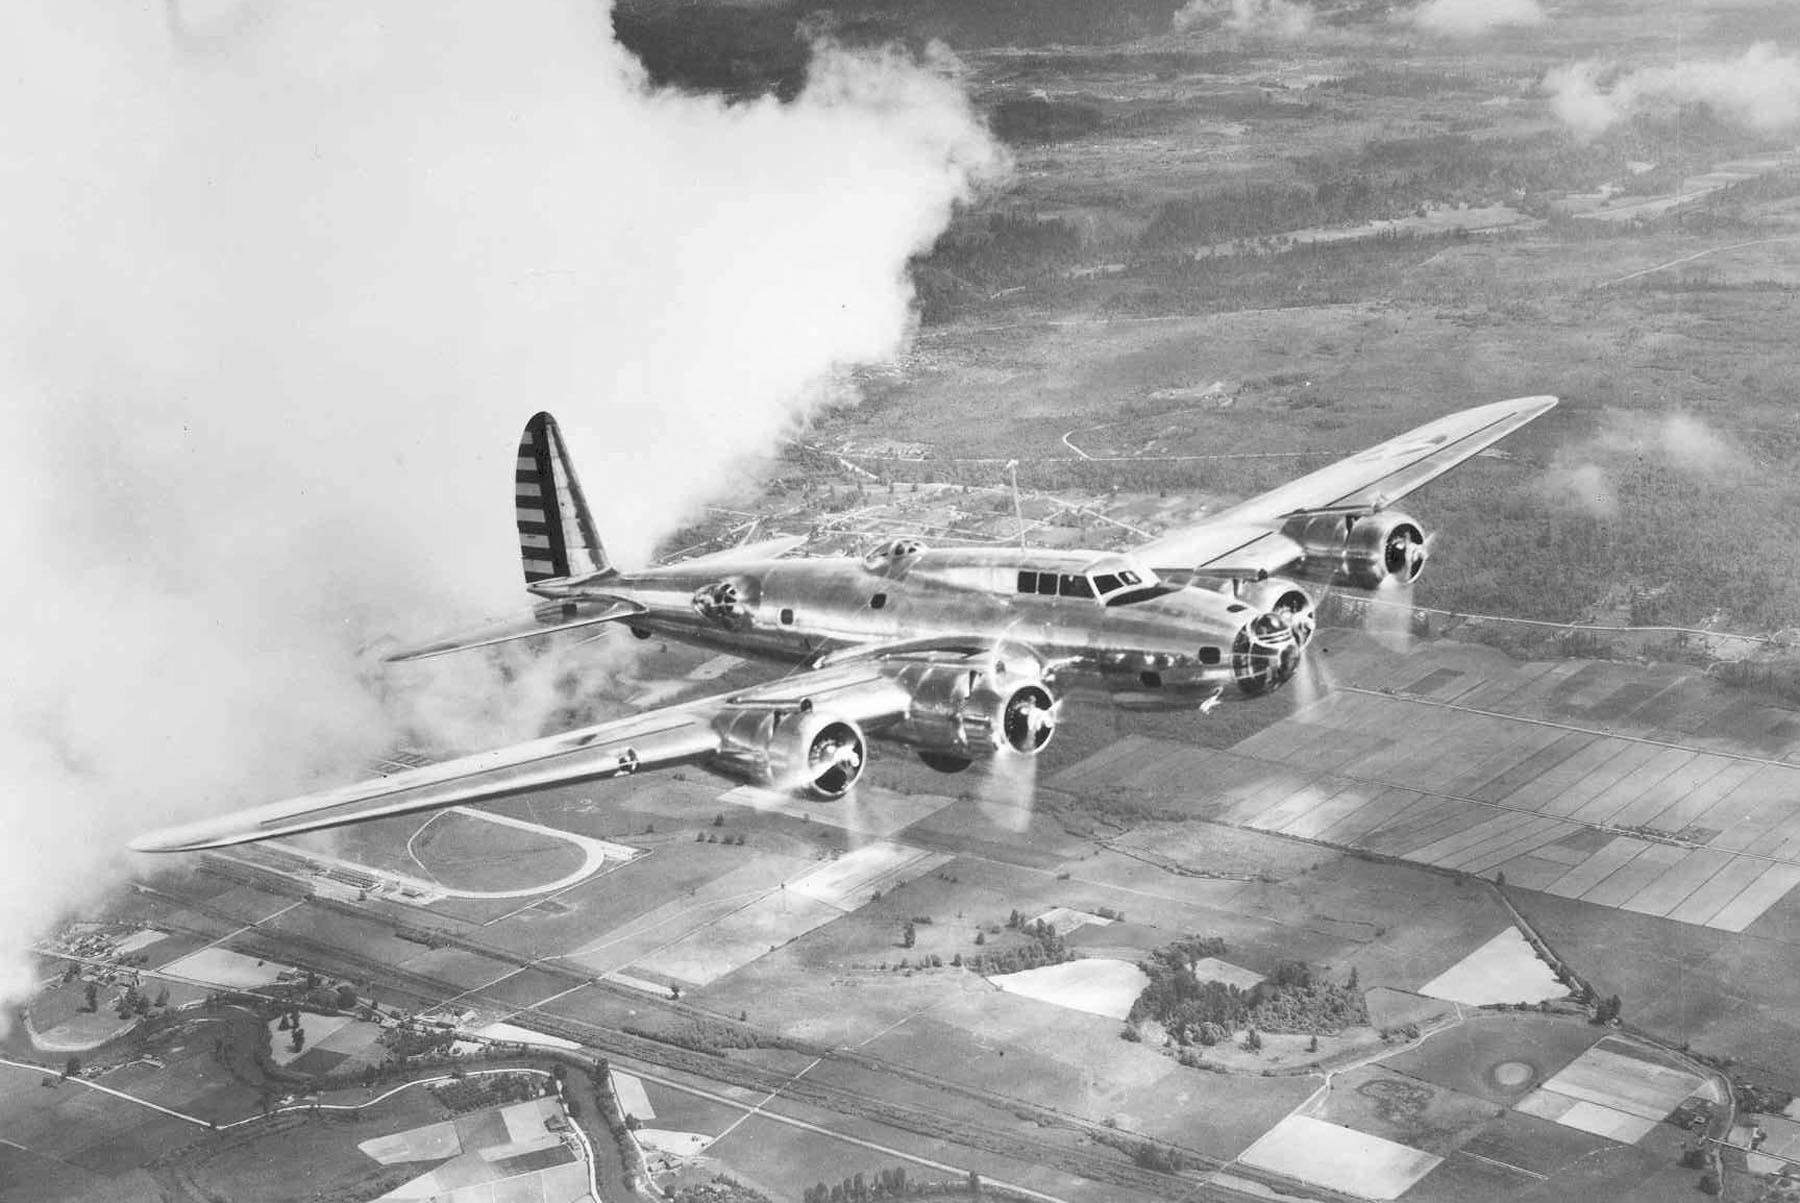 Boeing XB-38 Flying Fortress - Wikipedia